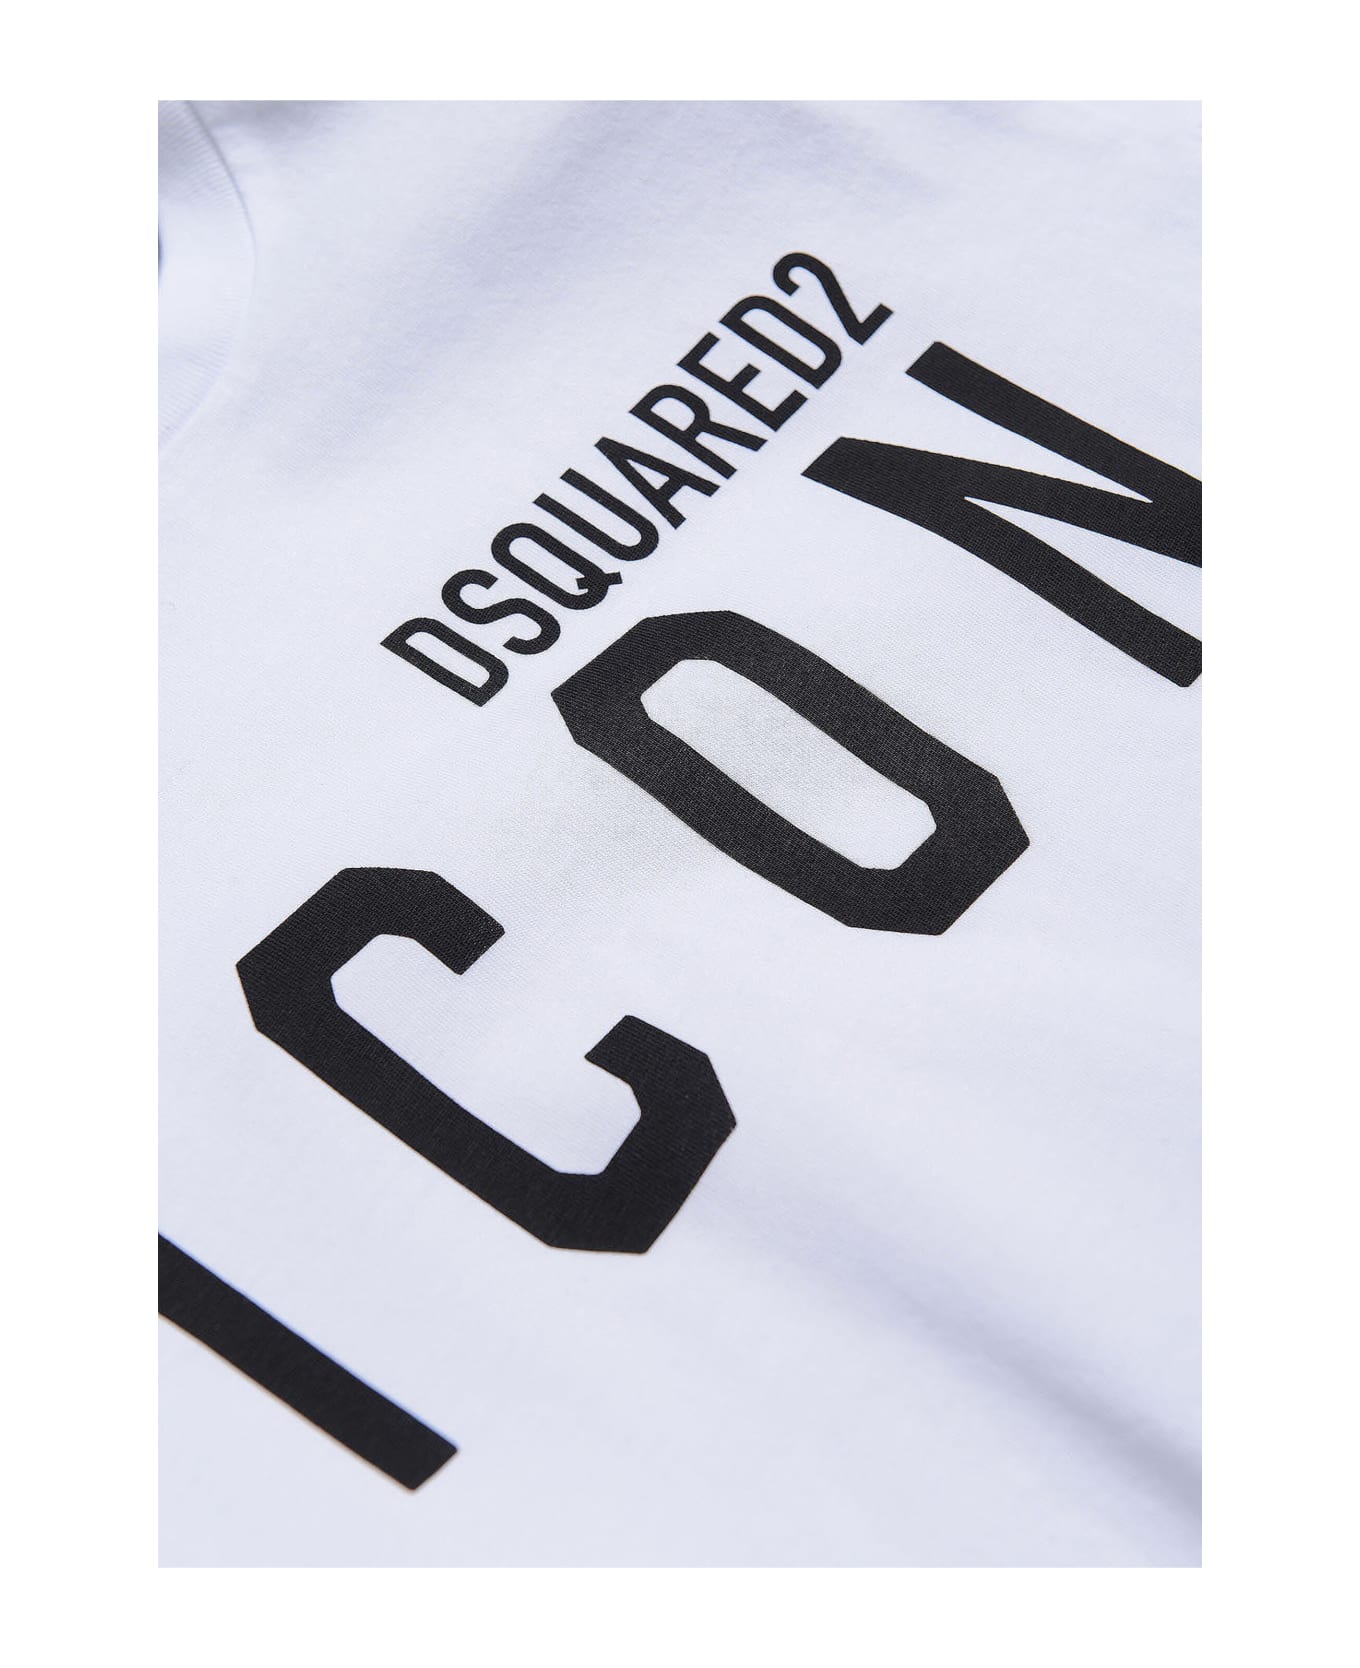 Dsquared2 D2t582u Relax-icon T-shirt Dsquared Icon Logo Crew-neck Jersey T-shirt - White Tシャツ＆ポロシャツ